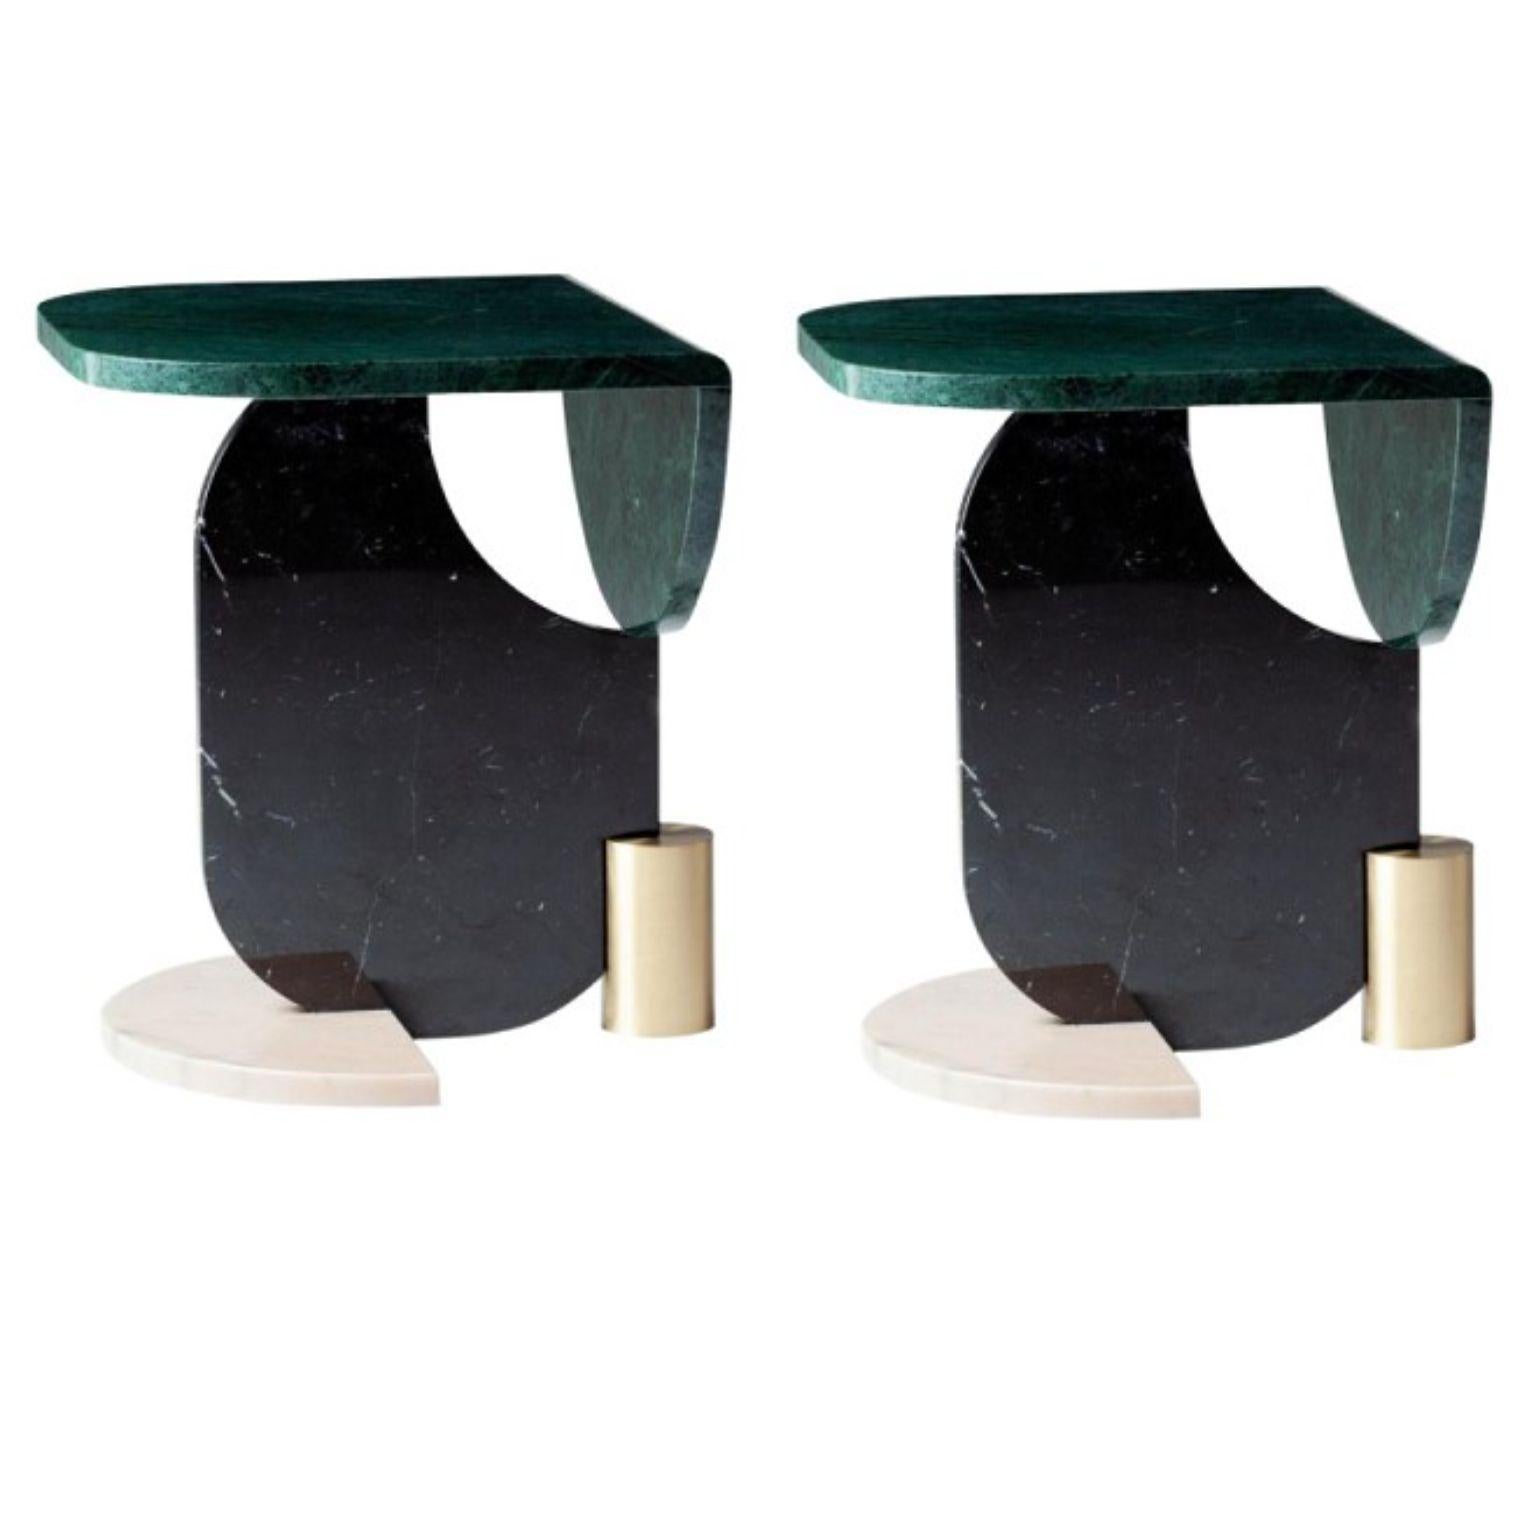 Set of 2 Playing Games Marble Side Tables by Dooq
Measures: W 52 cm 20”
D 60 cm 24”
H 61 cm 24”

Materials: top, oval and half-circle base marble:
Guatemala green, estremoz white, estremoz
rose, Carrara, Nero Marquina, Emperador
metal base